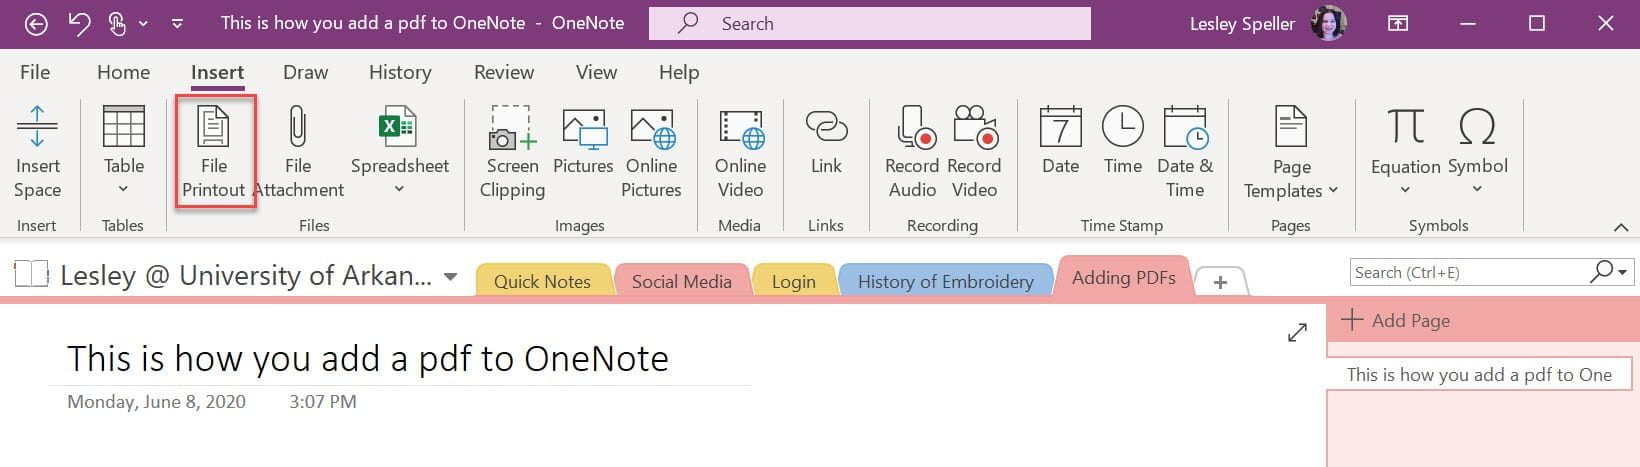 Taking Notes On A Pdf In Onenote Teaching Innovation And Pedagogical Support